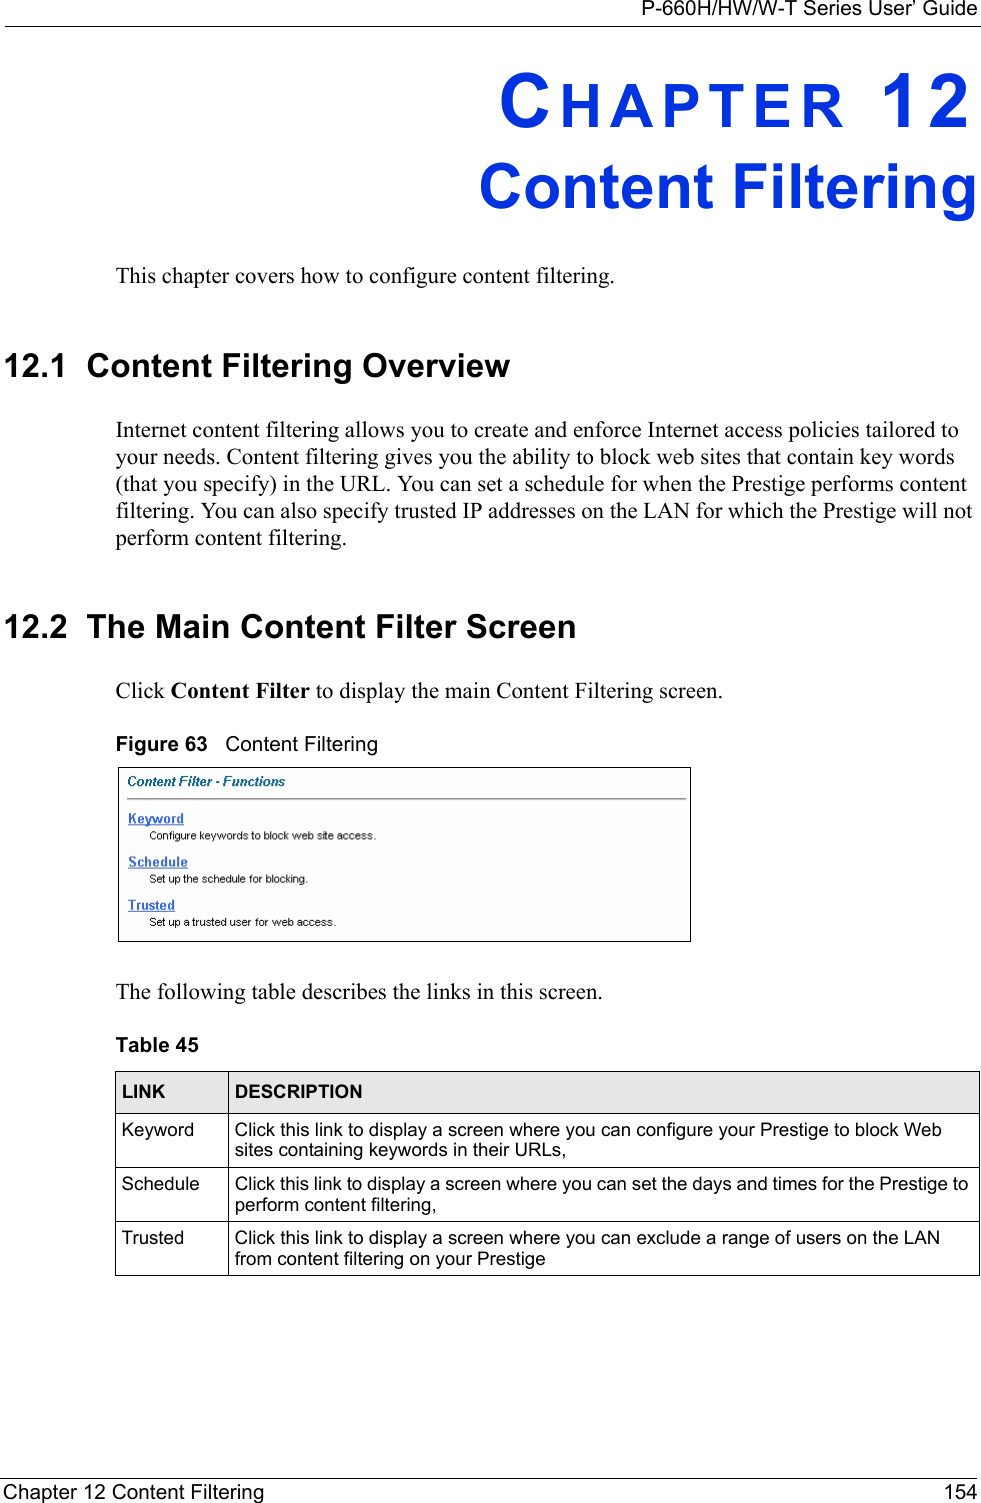 P-660H/HW/W-T Series User’ GuideChapter 12 Content Filtering 154CHAPTER 12Content FilteringThis chapter covers how to configure content filtering.12.1  Content Filtering Overview Internet content filtering allows you to create and enforce Internet access policies tailored to your needs. Content filtering gives you the ability to block web sites that contain key words (that you specify) in the URL. You can set a schedule for when the Prestige performs content filtering. You can also specify trusted IP addresses on the LAN for which the Prestige will not perform content filtering.12.2  The Main Content Filter Screen Click Content Filter to display the main Content Filtering screen. Figure 63   Content Filtering The following table describes the links in this screen. Table 45   LINK DESCRIPTIONKeyword Click this link to display a screen where you can configure your Prestige to block Web sites containing keywords in their URLs, Schedule Click this link to display a screen where you can set the days and times for the Prestige to perform content filtering, Trusted Click this link to display a screen where you can exclude a range of users on the LAN from content filtering on your Prestige